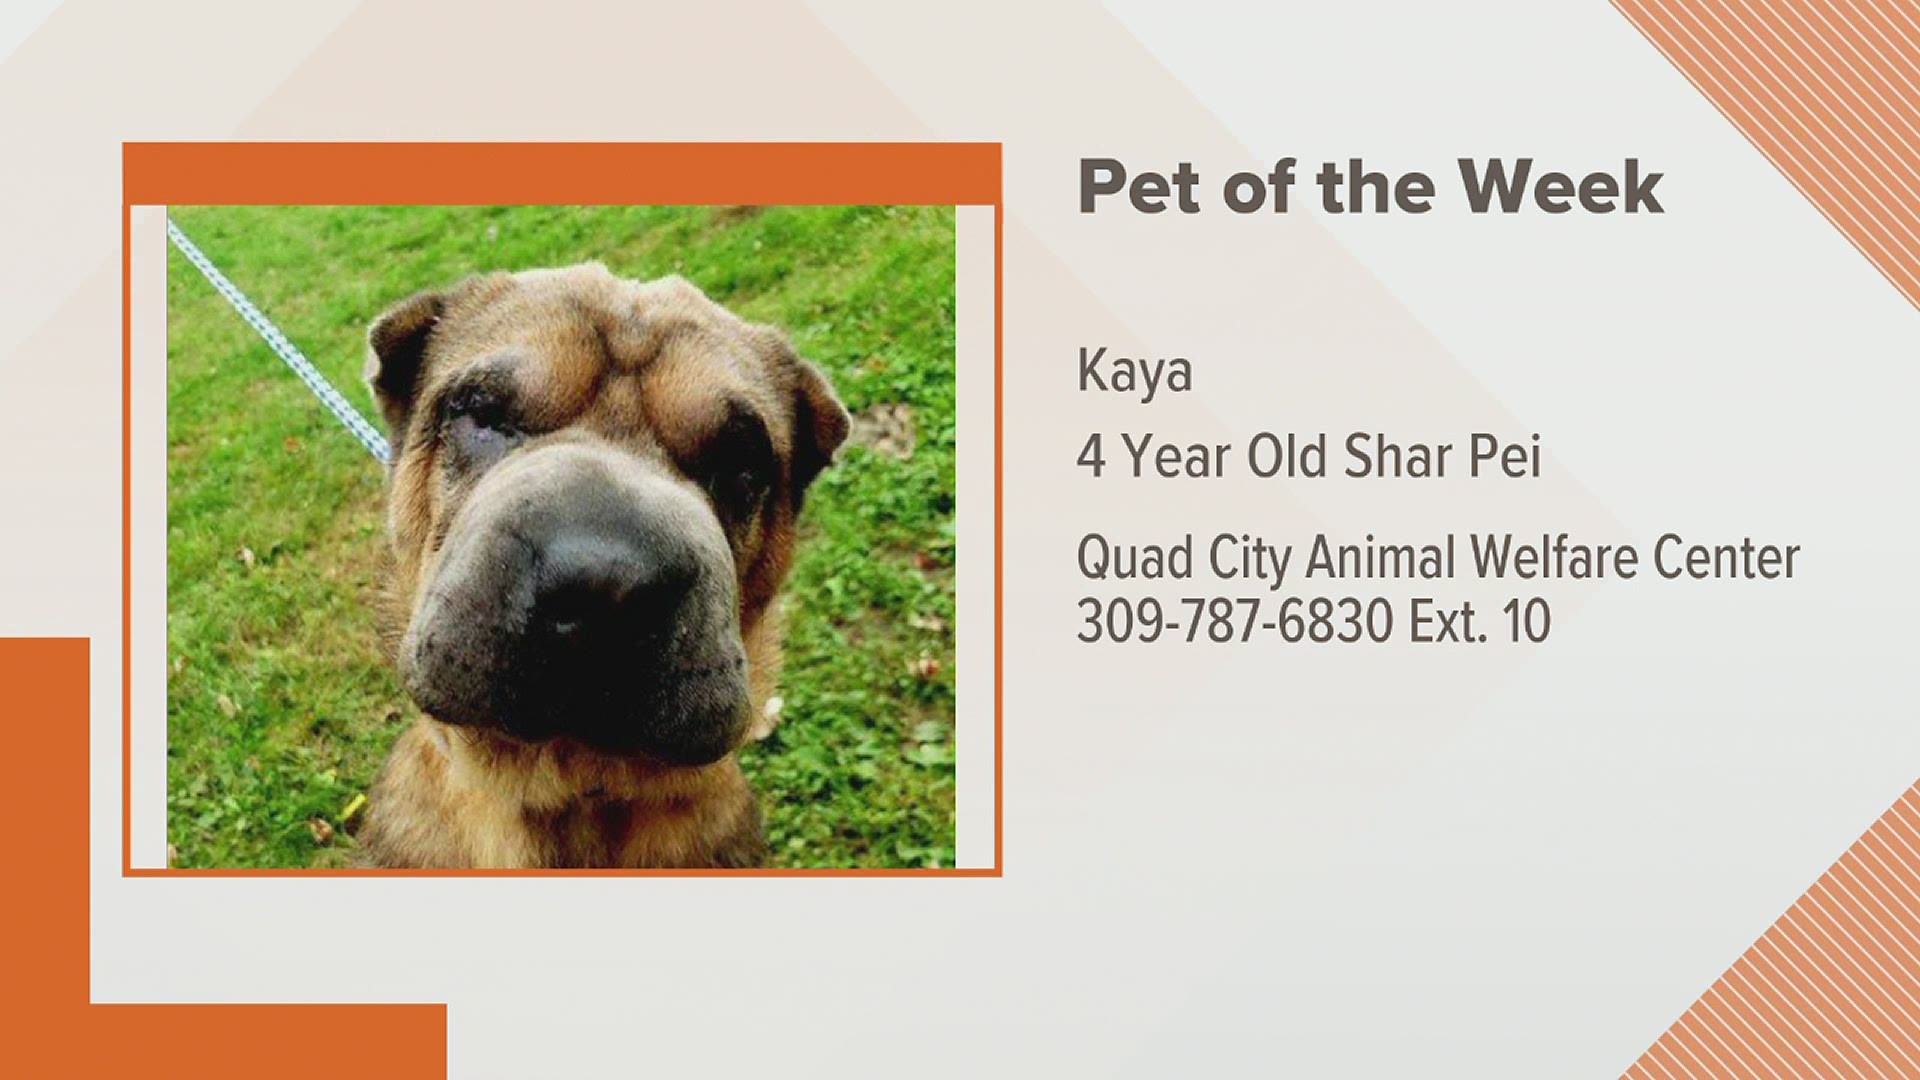 The Quad City Animal Welfare Center's Pet of the Week for October 12th is Kaya the Shar Pei!